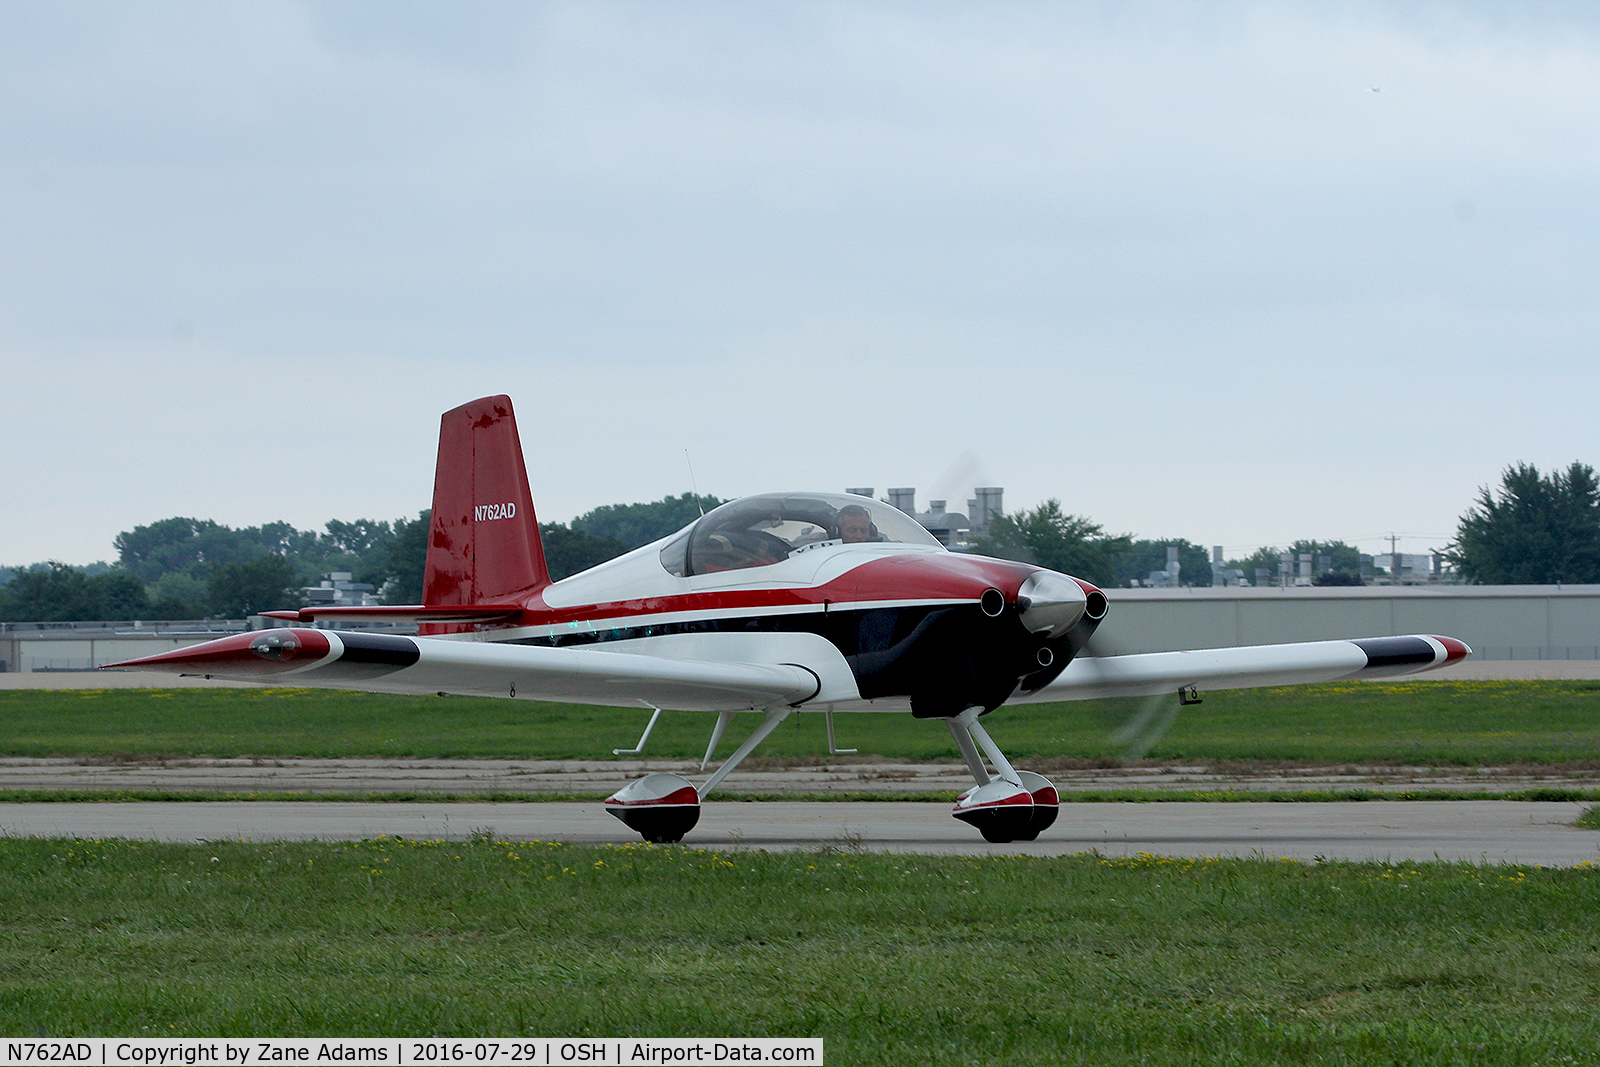 N762AD, Vans RV-7A C/N 72846, At the 2016 EAA AirVenture - Oshkosh, Wisconsin